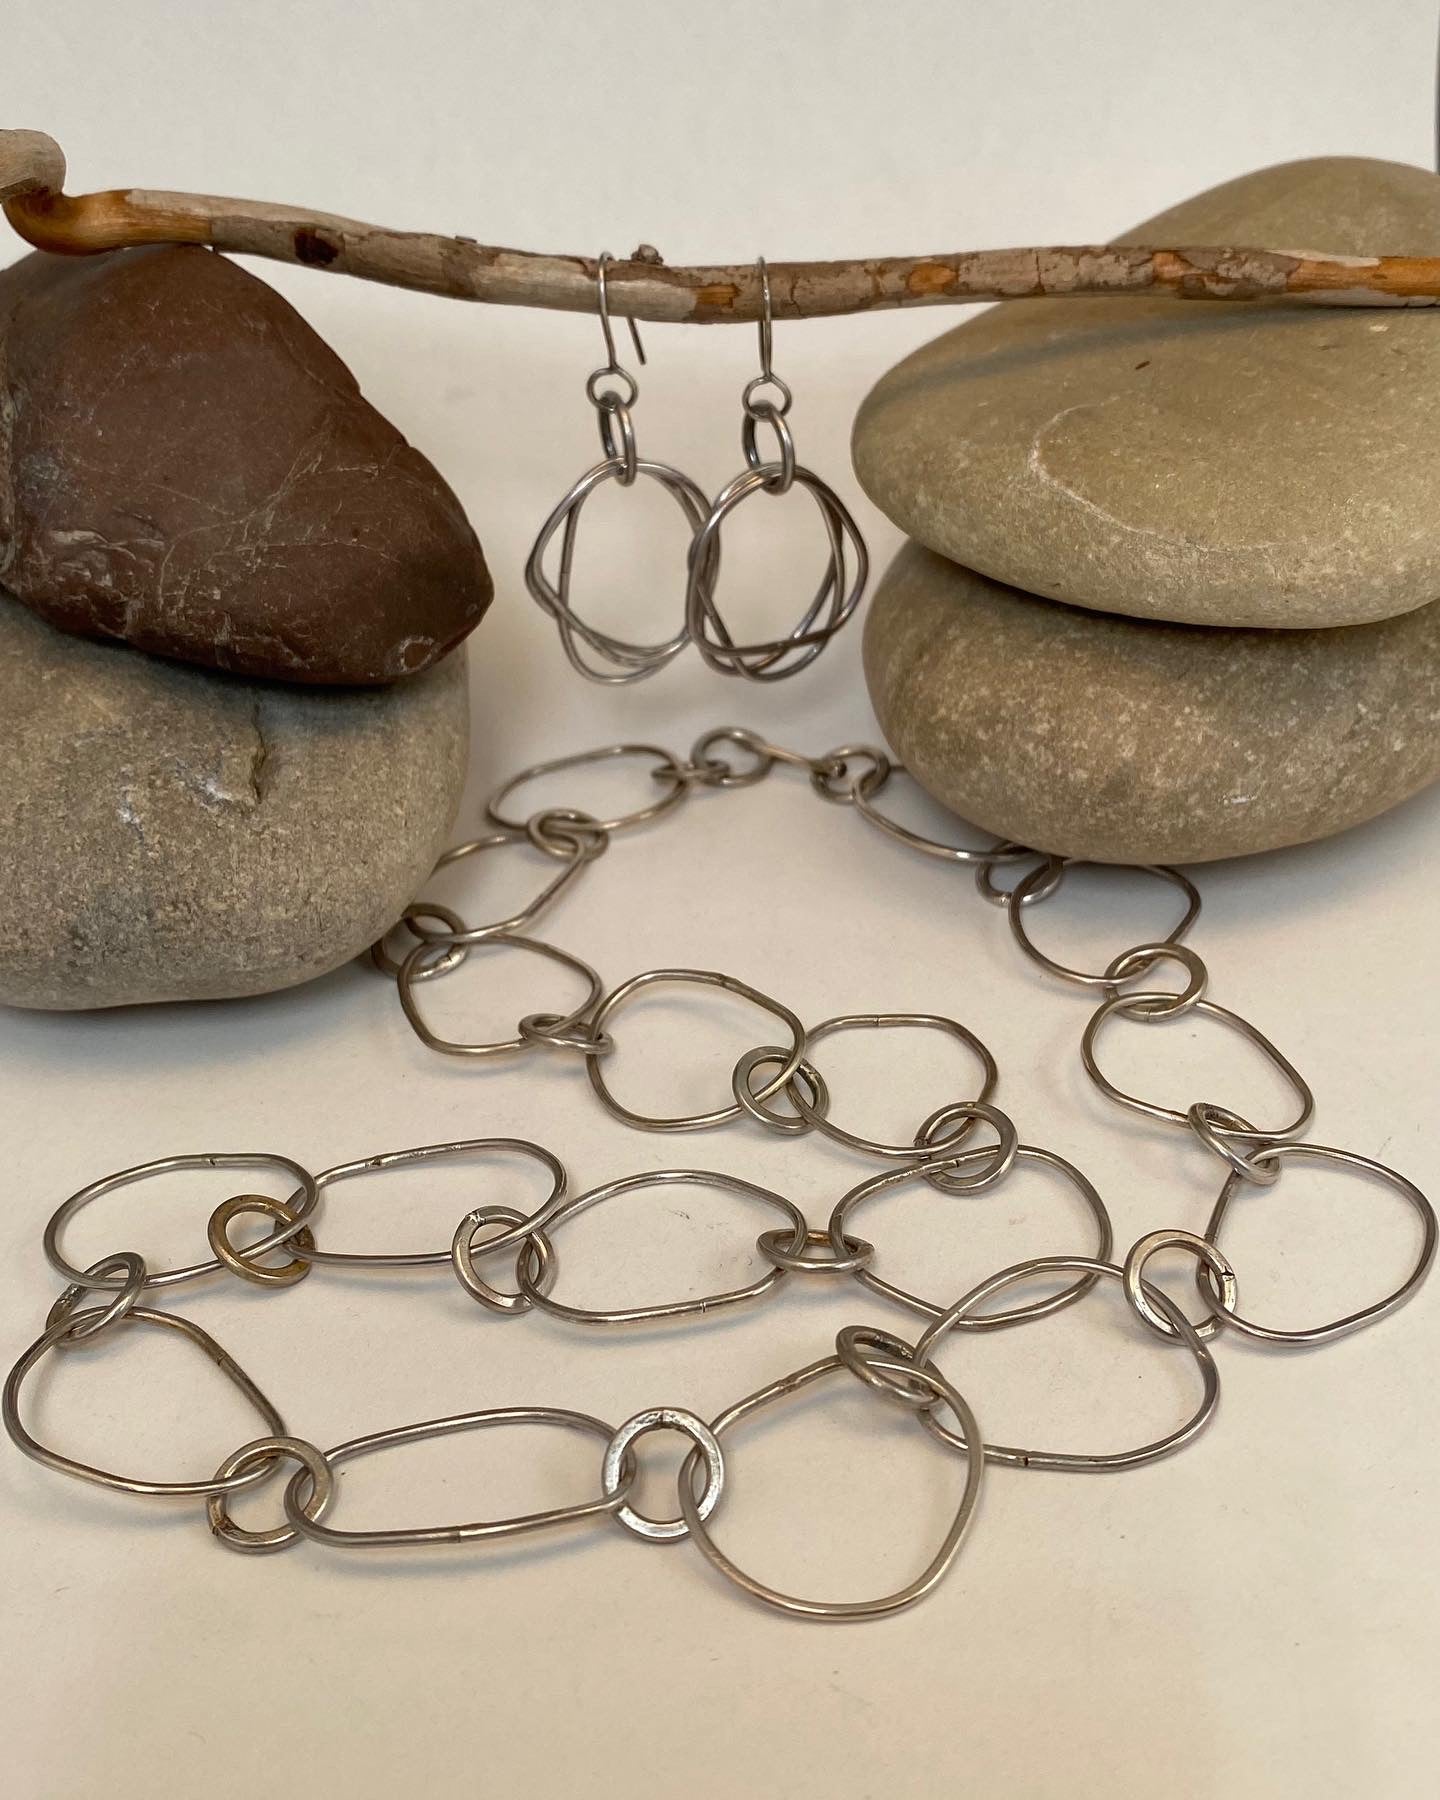 Unique design, hand-crafted sterling silver chain and earrings. Adjustable length / max 26". Style: organic, rustic, boho, elemental, earthy yet elegant. 